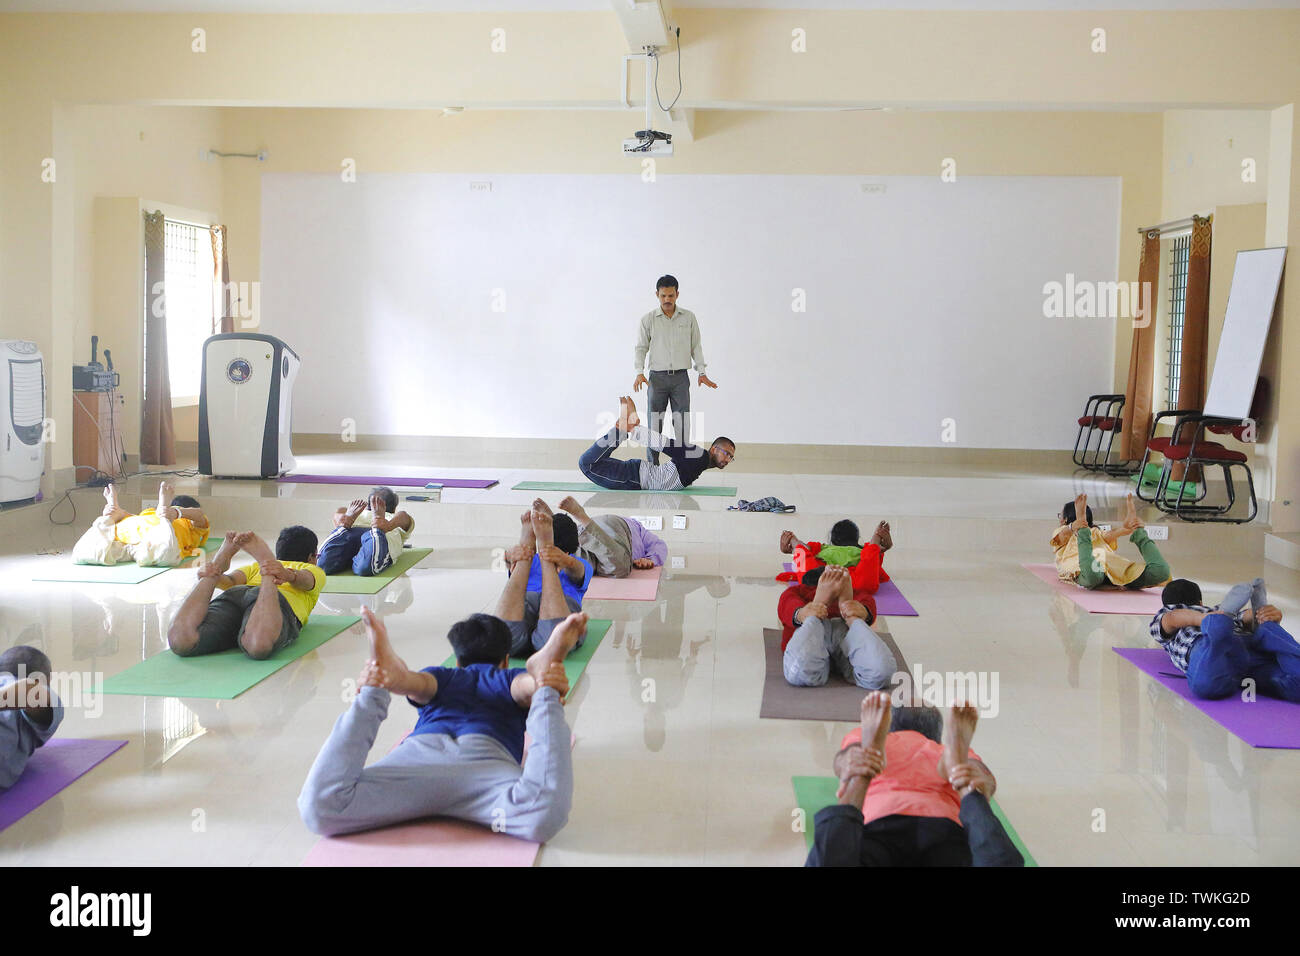 Bangalore, Karnataka, INdia. 13th Dec, 2018. 13 Dec 2018 - Bangalore, INDIA.Dr. Hemant Bhargav, Senior Scientific Officer & Principal Investigator, NIMHANS Integrated Centre for Yoga ; teaches yoga postures at the Yoga Center at NIMHANS.After various scientific Tests the NIMHANS (National Institute of Mental Health and Neuro Sciences) concluded that there are immense positive healing effects of Yoga on the body & the chanting of the word 'AUM' helps the mind attain a deep state of relaxation. Credit: Subhash Sharma/ZUMA Wire/Alamy Live News Stock Photo